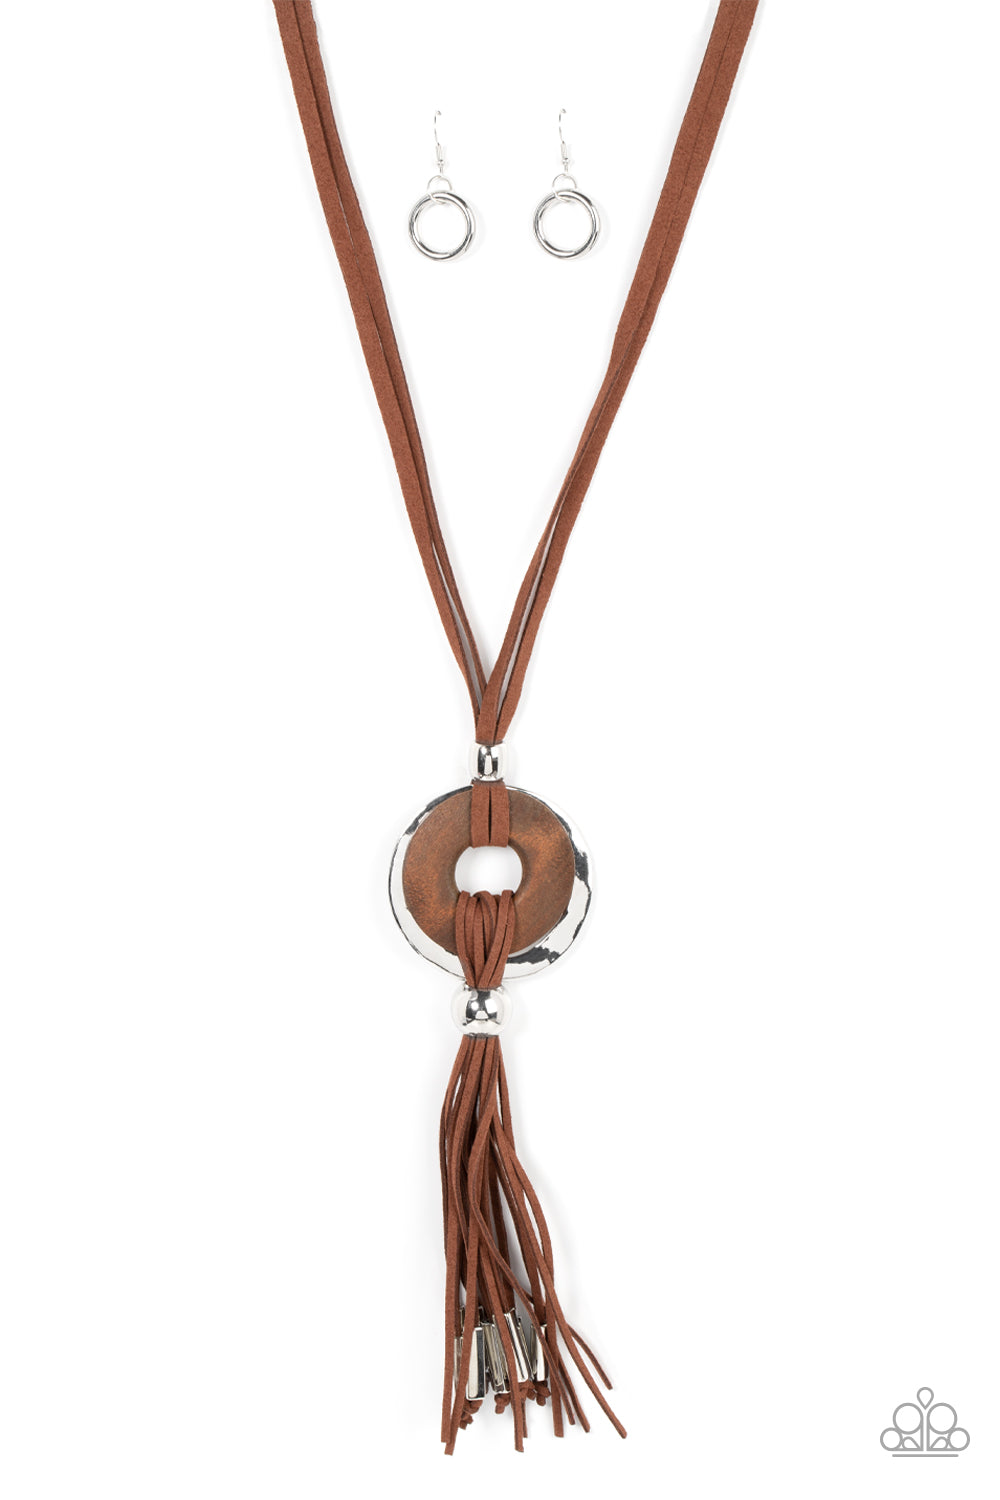 Loops of brown suede knot around a distressed wooden disc and hammered silver disc, resulting in a rustic pendant. The artisan inspired centerpiece gives way to a suede tassel capped in silver fittings, resulting in a noise-making fringe. Features an adjustable clasp closure.  Sold as one individual necklace. Includes one pair of matching earrings.